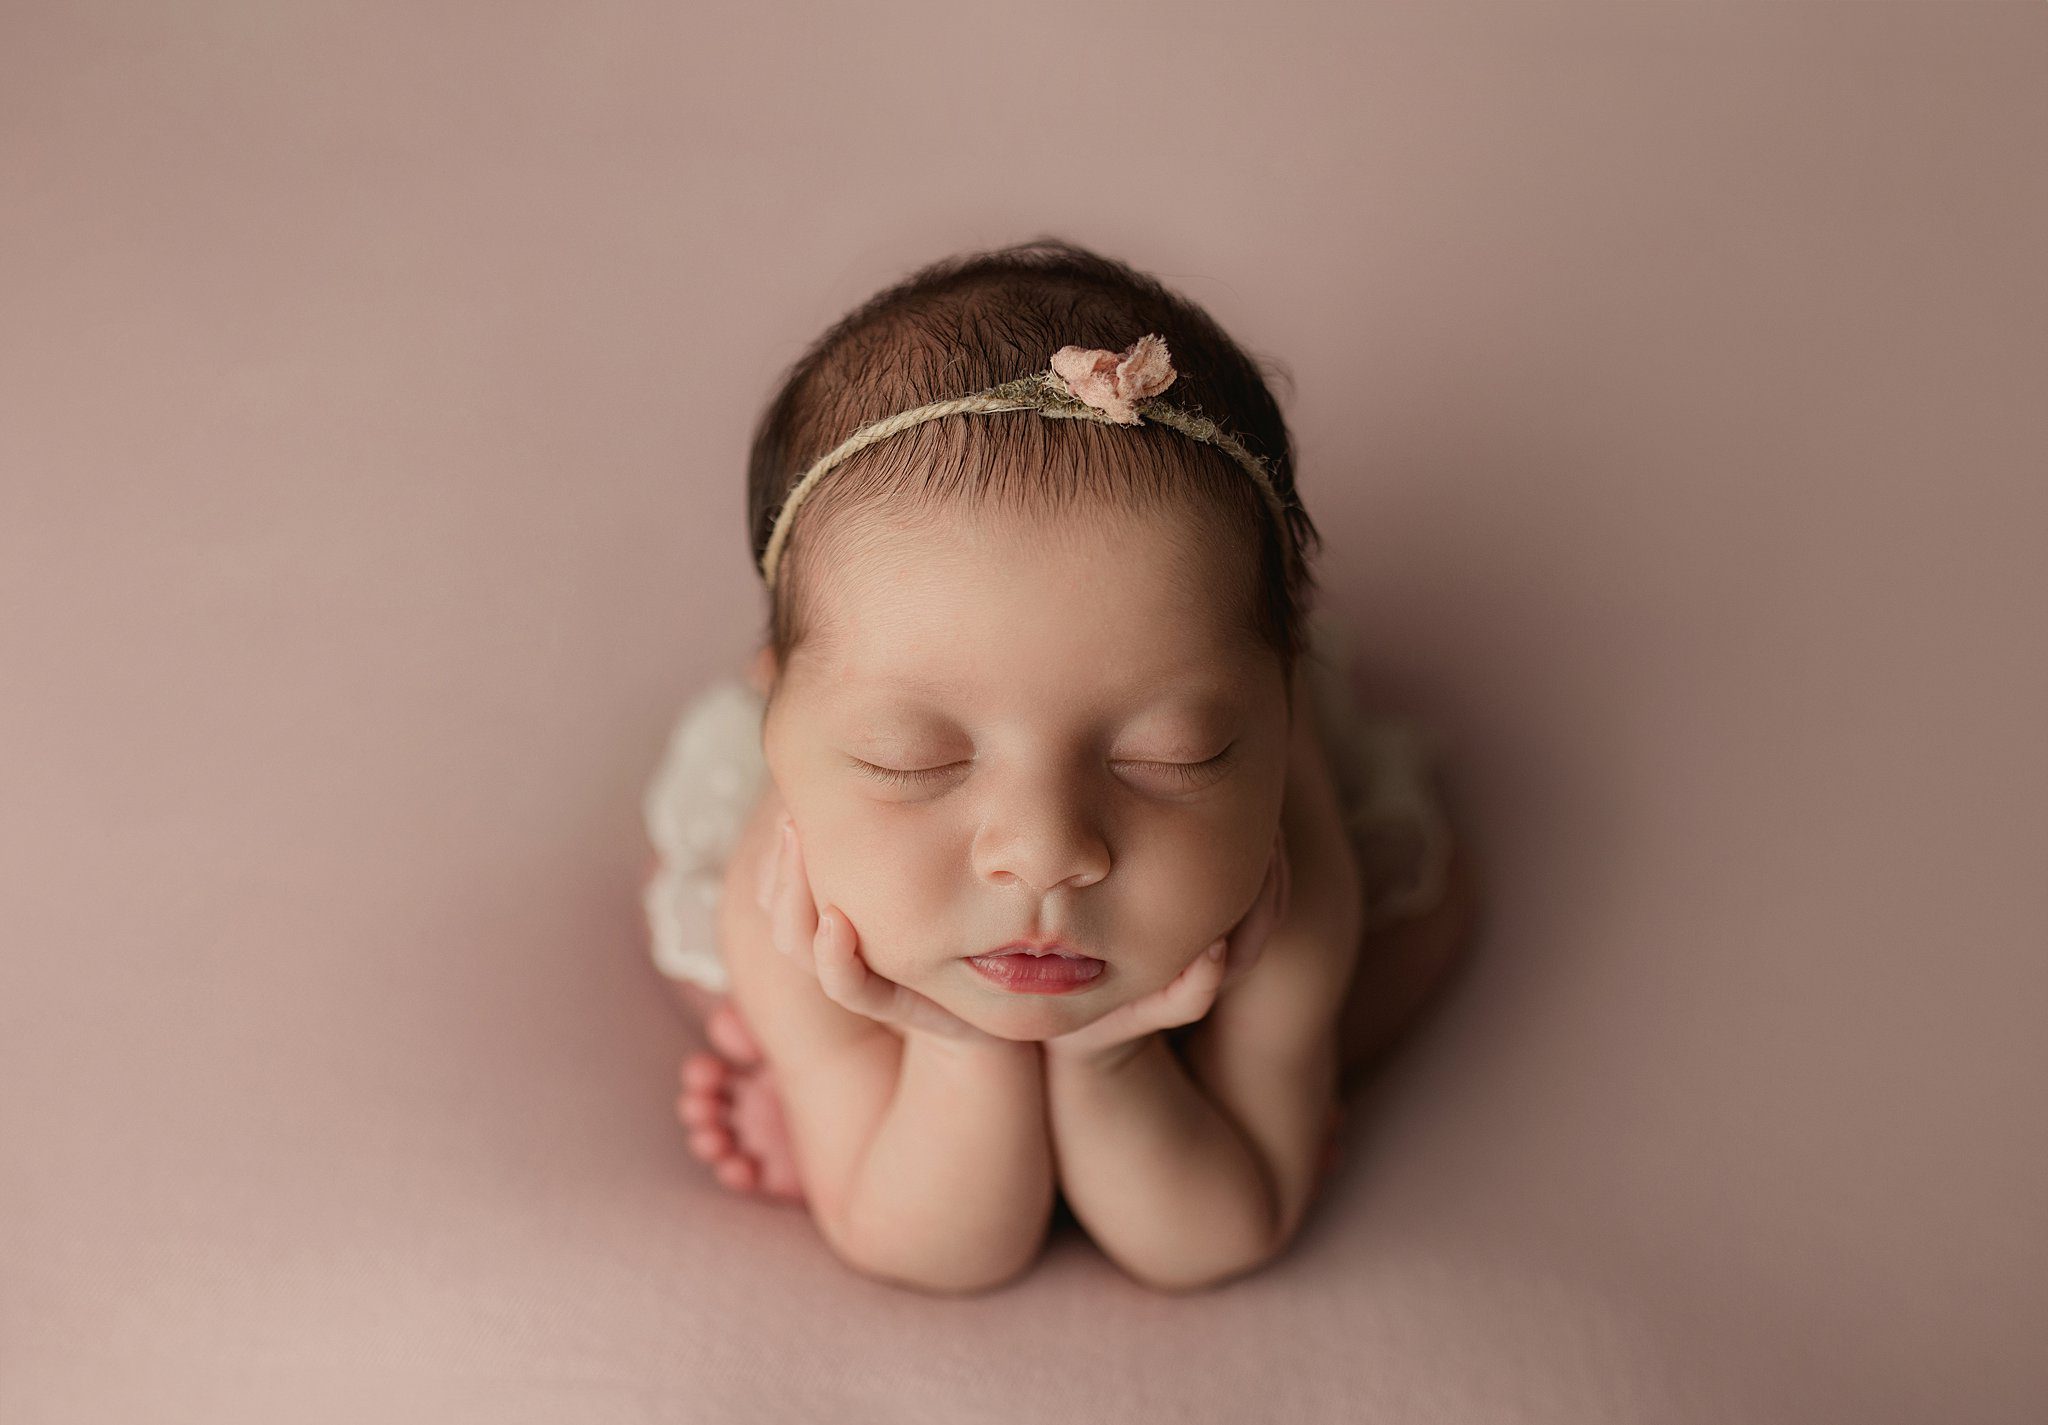 A newborn baby girl sleeps while resting her head on her hands in a studio before some things to do in anaheim with kids